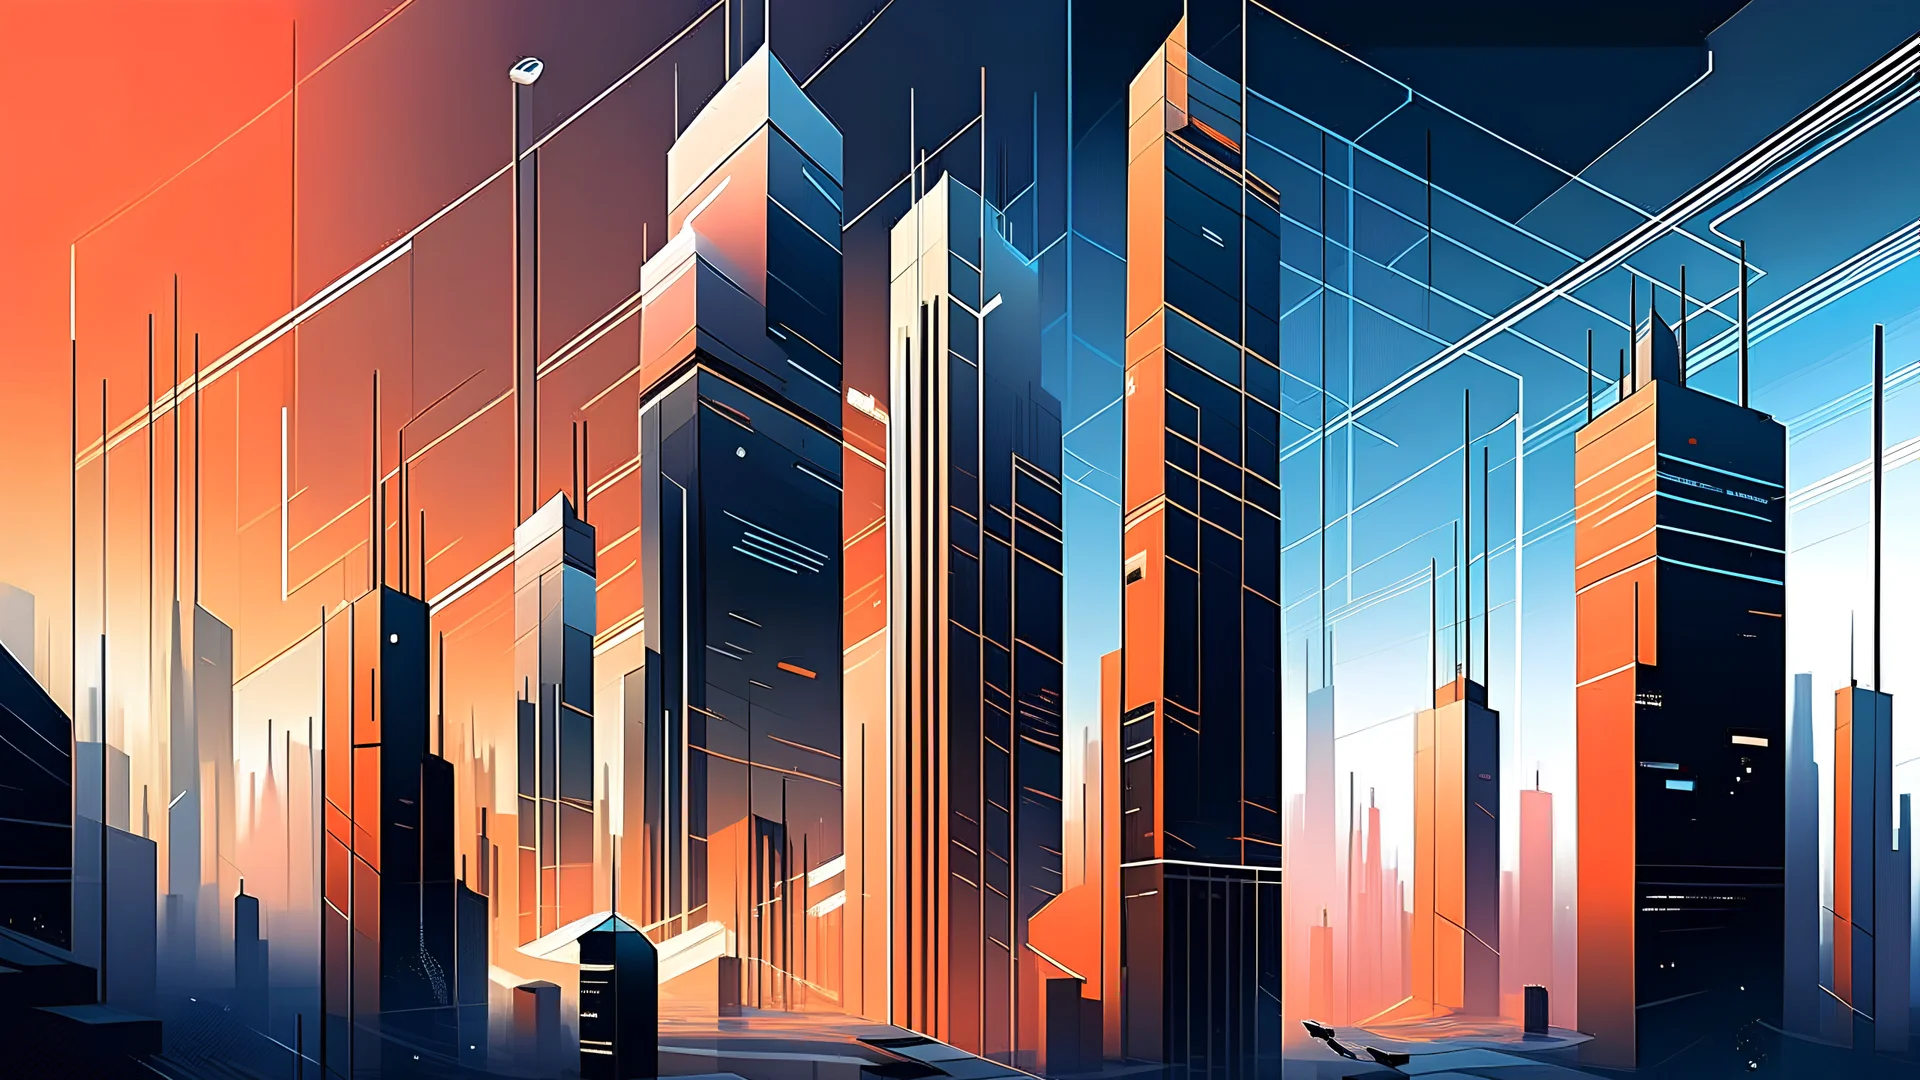 A visually striking image portrays the idea of Equalibrium through a digital illustration. The artwork showcases a futuristic cityscape with towering skyscrapers and bustling energy, emphasizing the smooth integration of an incentive-based collaboration system. It captures the essence of Universal Law by highlighting the dynamic equilibrium achieved through sustainable production of tangible value at both the local and communal levels. The modern and sleek style, vibrant colors, and intricate